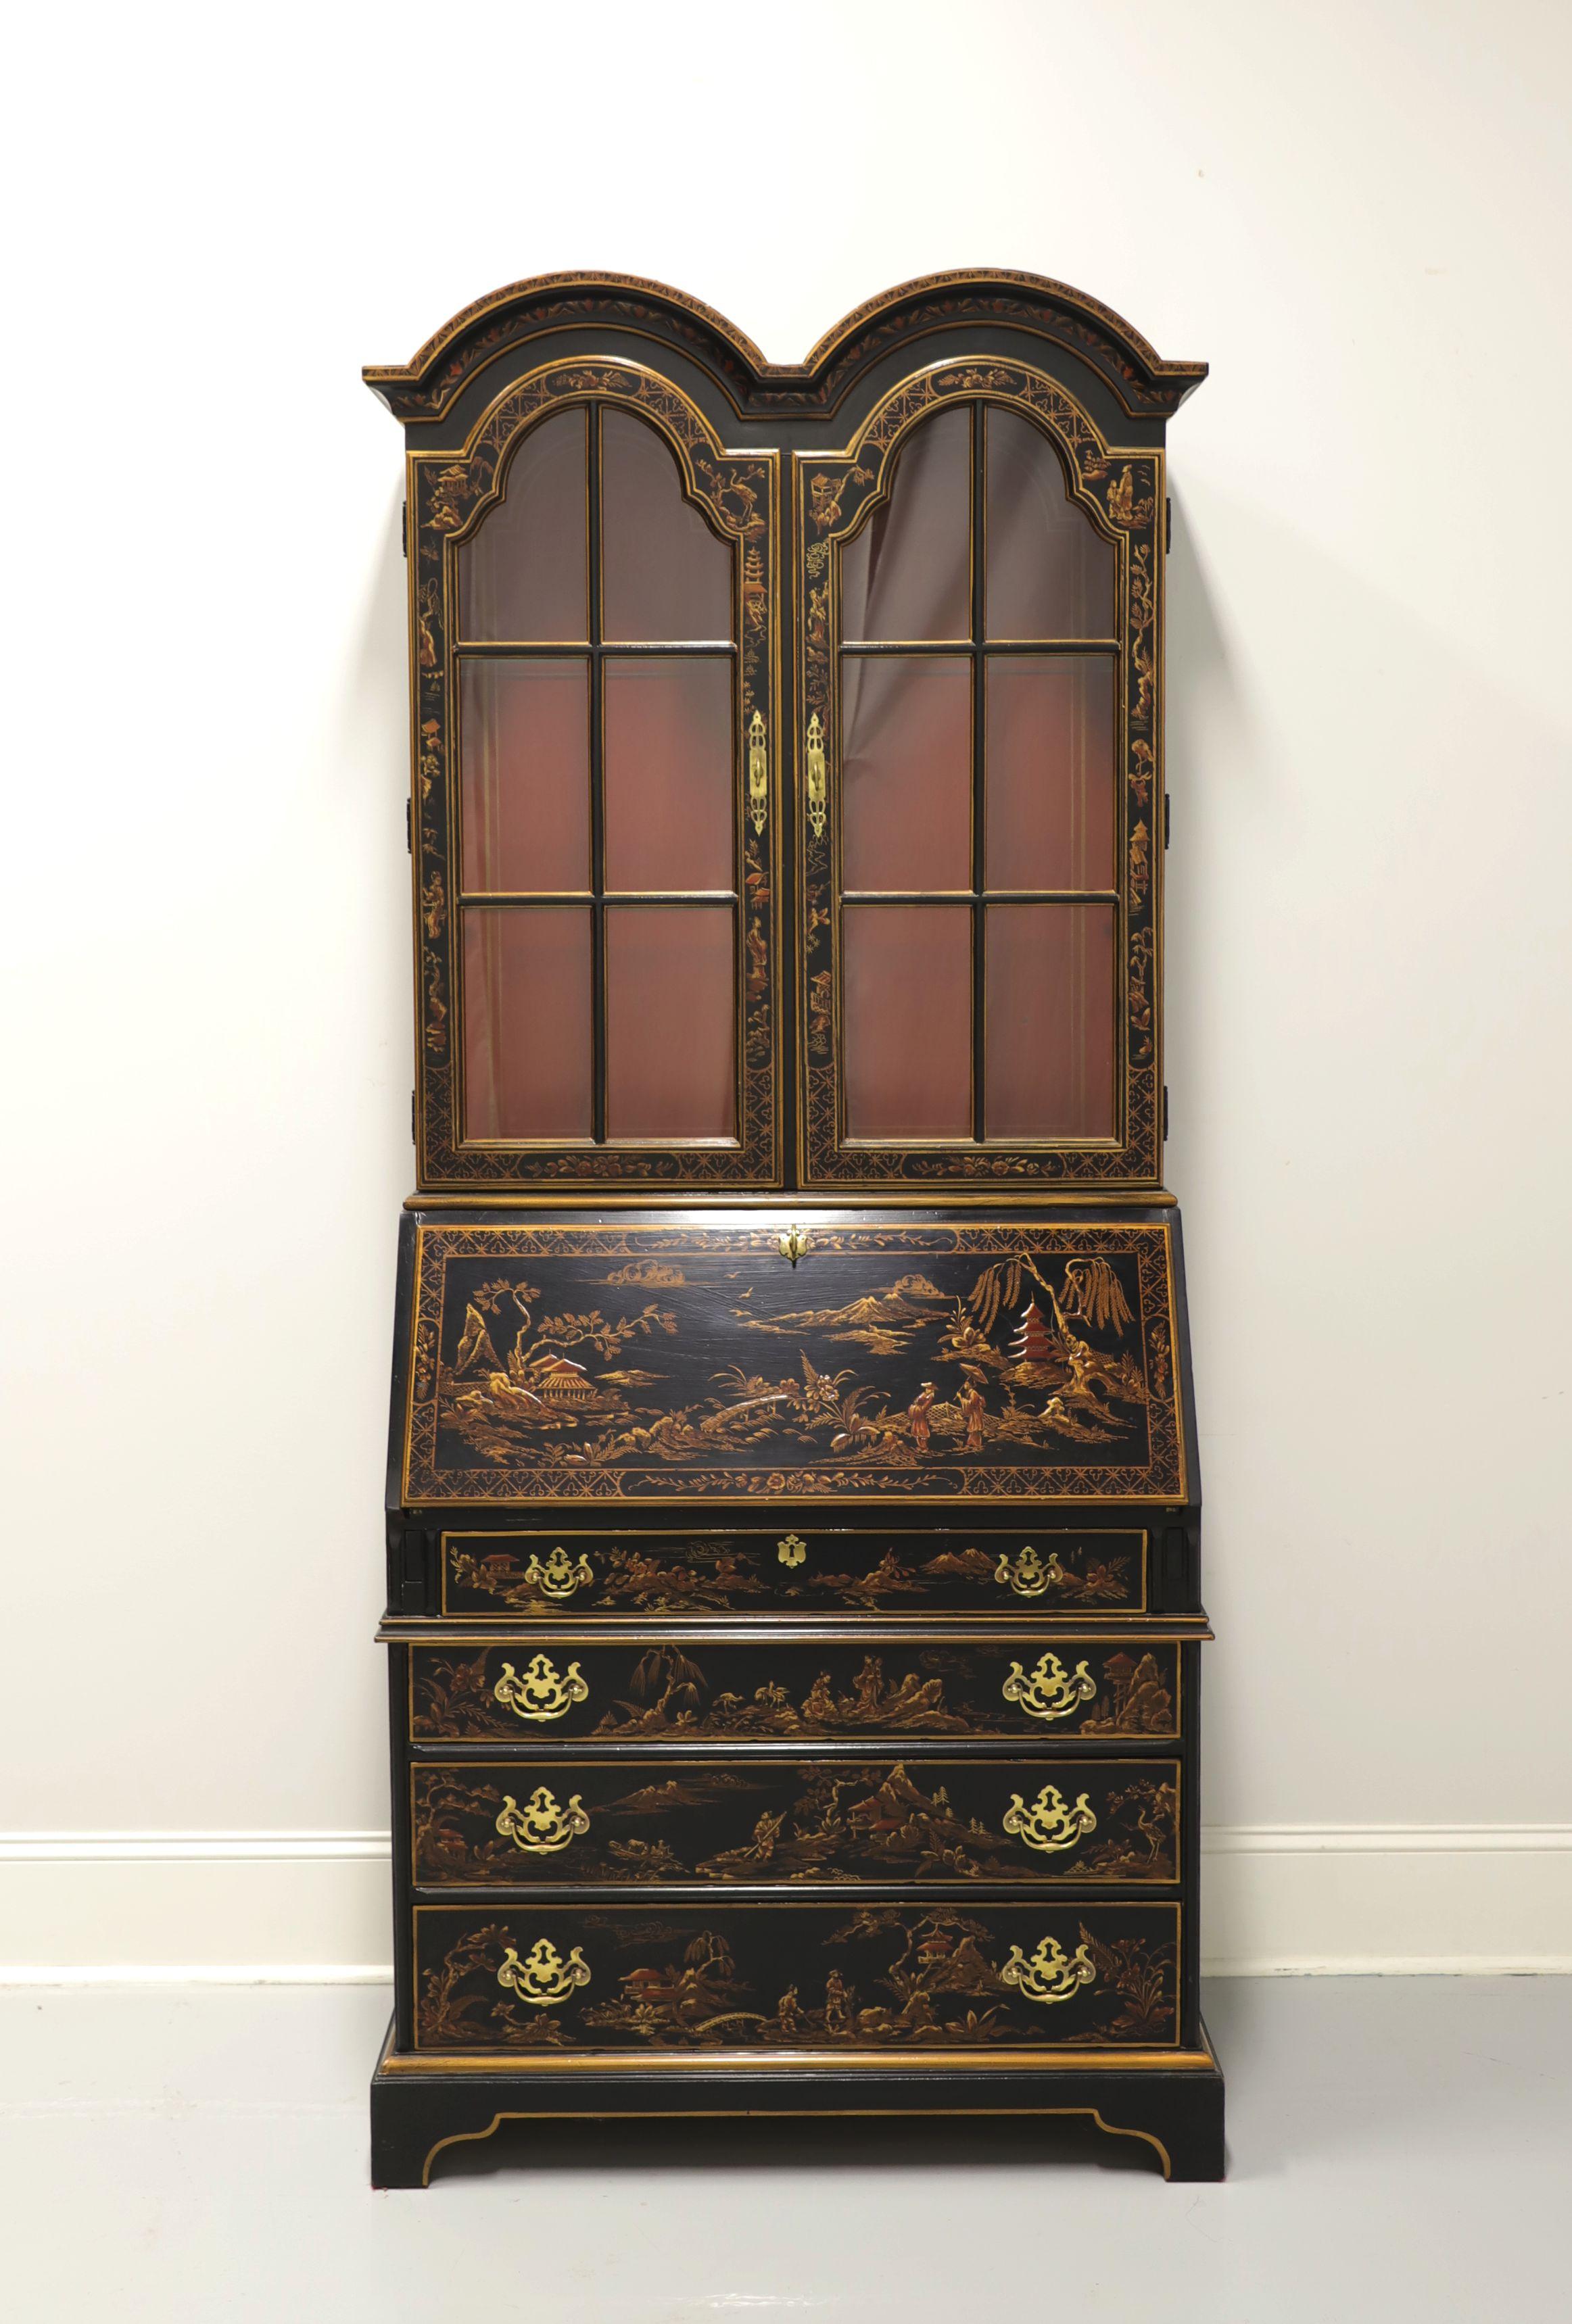 An Asian Chinoiserie style secretary desk by Drexel Heritage, from their Et Cetera Collection. Solid wood with black lacquer, hand painted Chinoiserie scene accents, double bonnet arched top, brass hardware and bracket feet. Upper lighted display